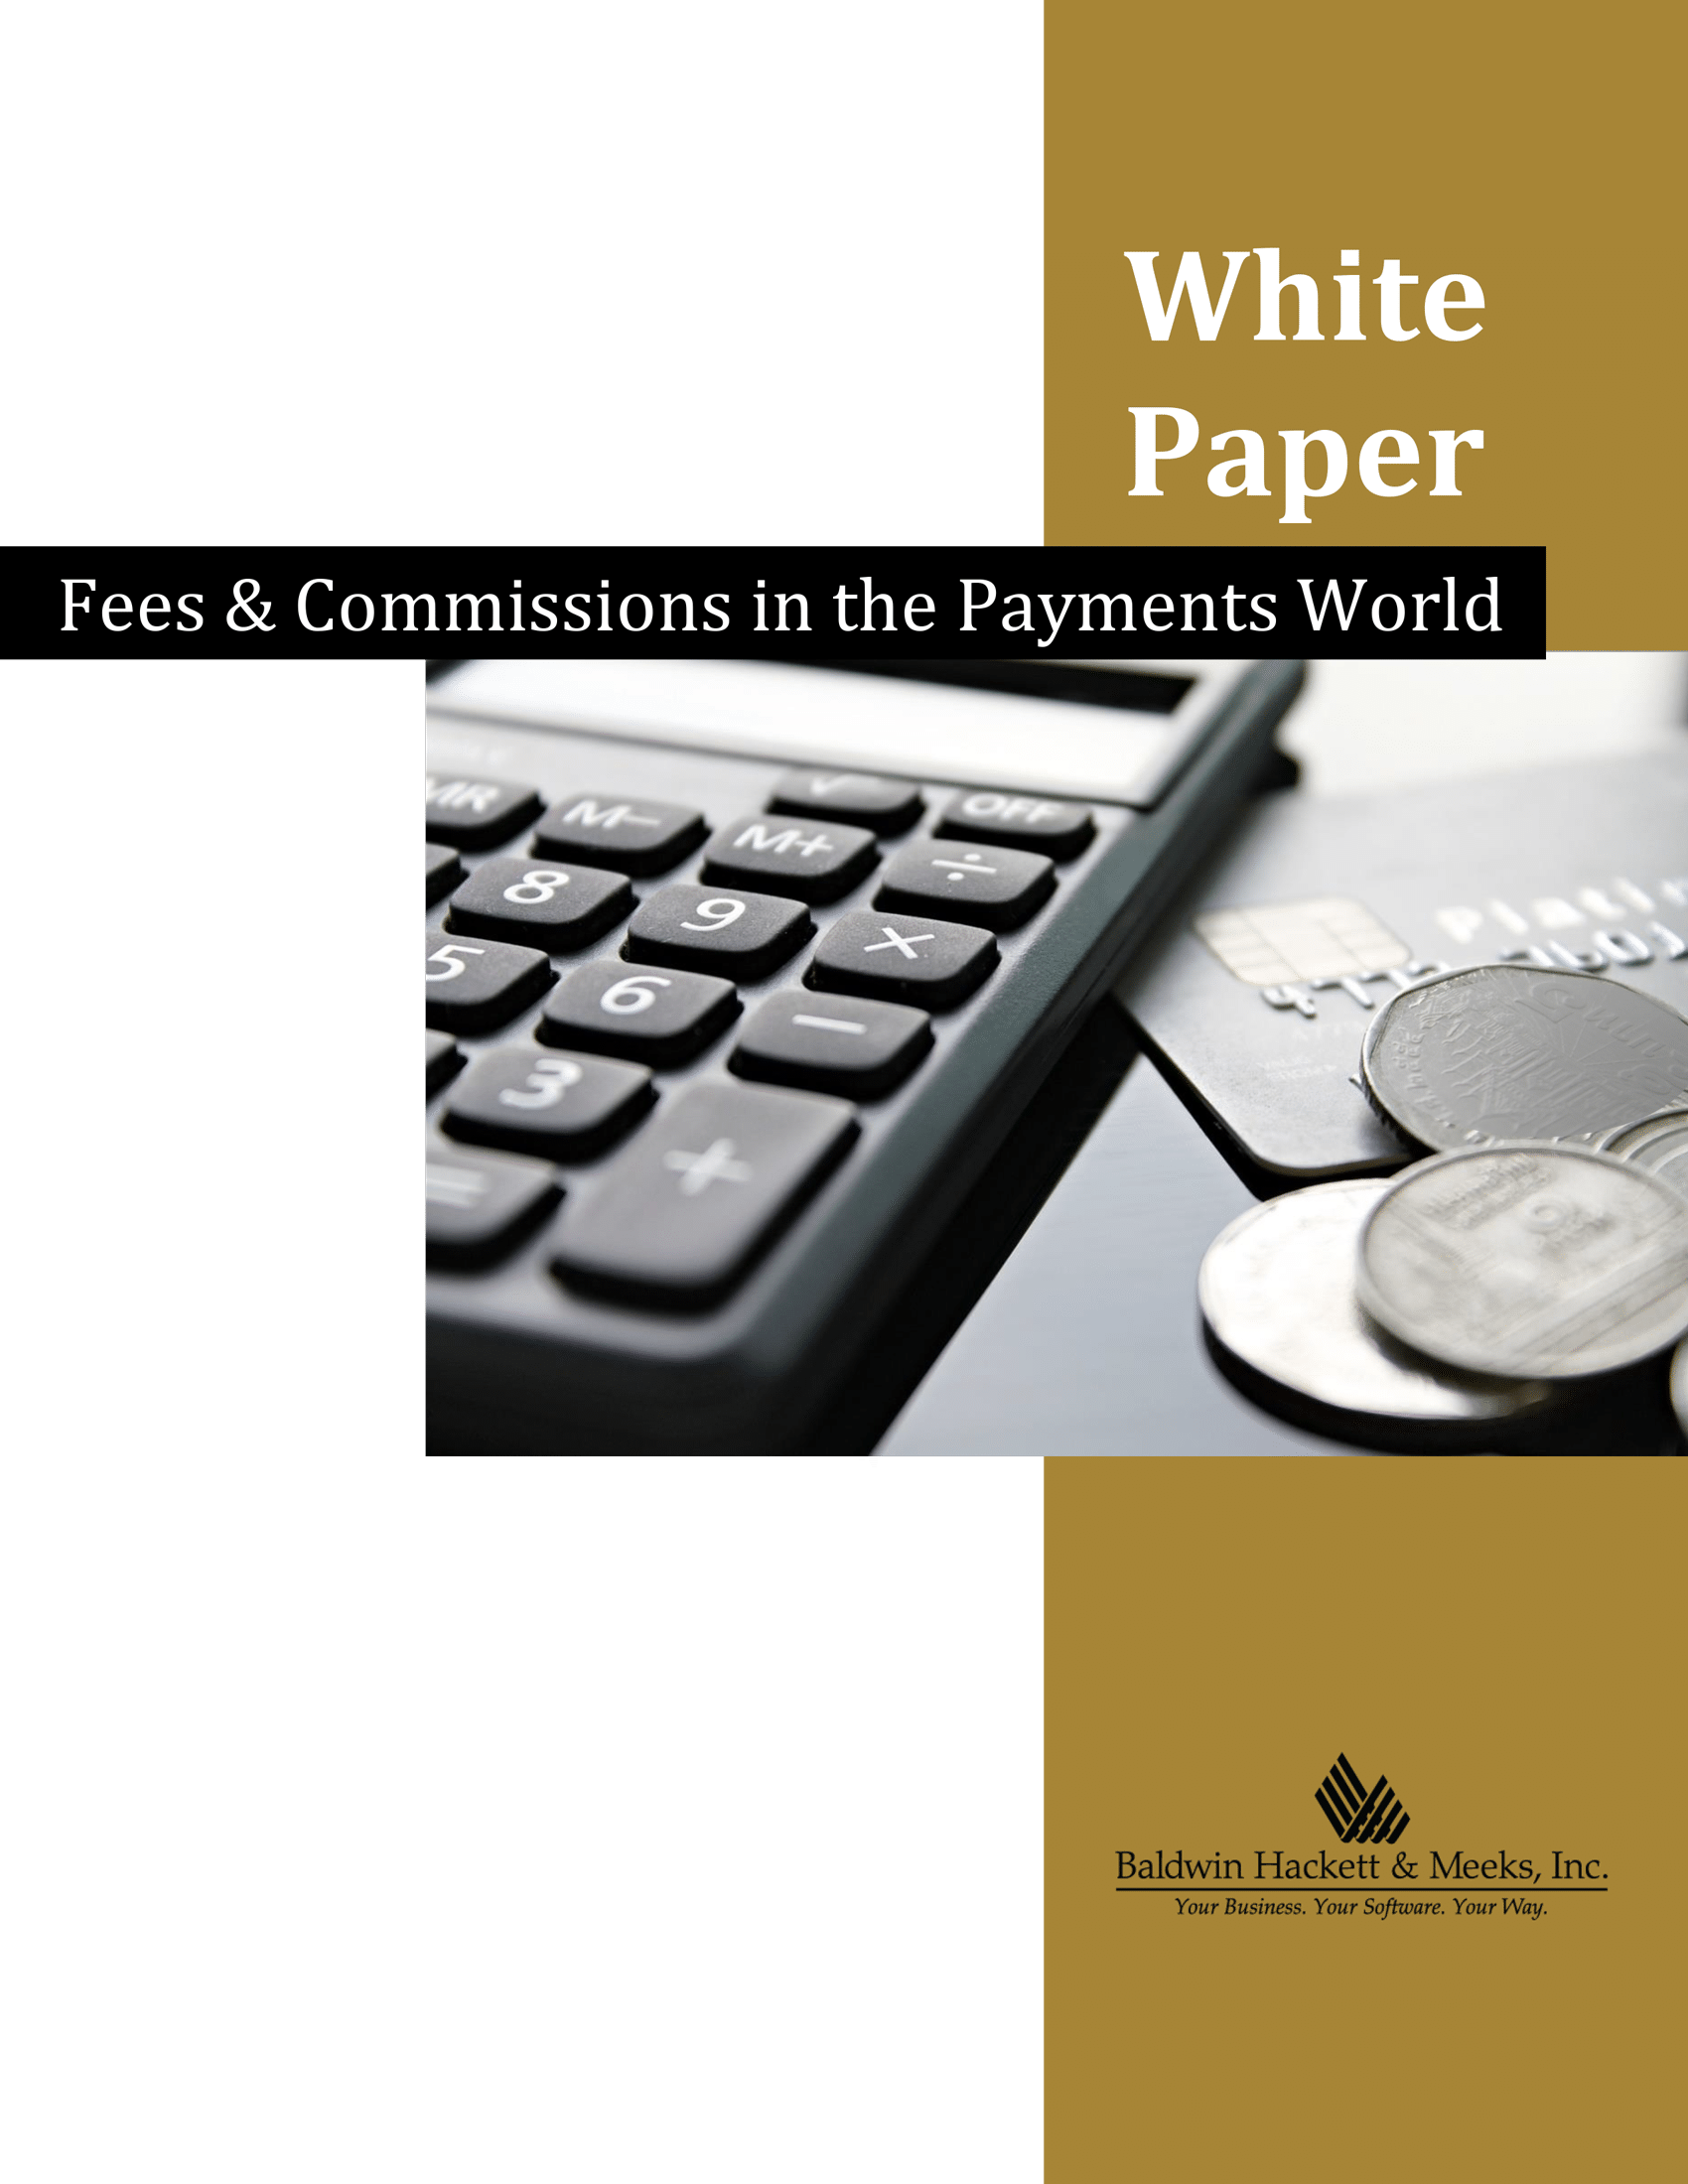 WHITE PAPER: FEES & COMMISSIONS IN THE PAYMENTS WORLD